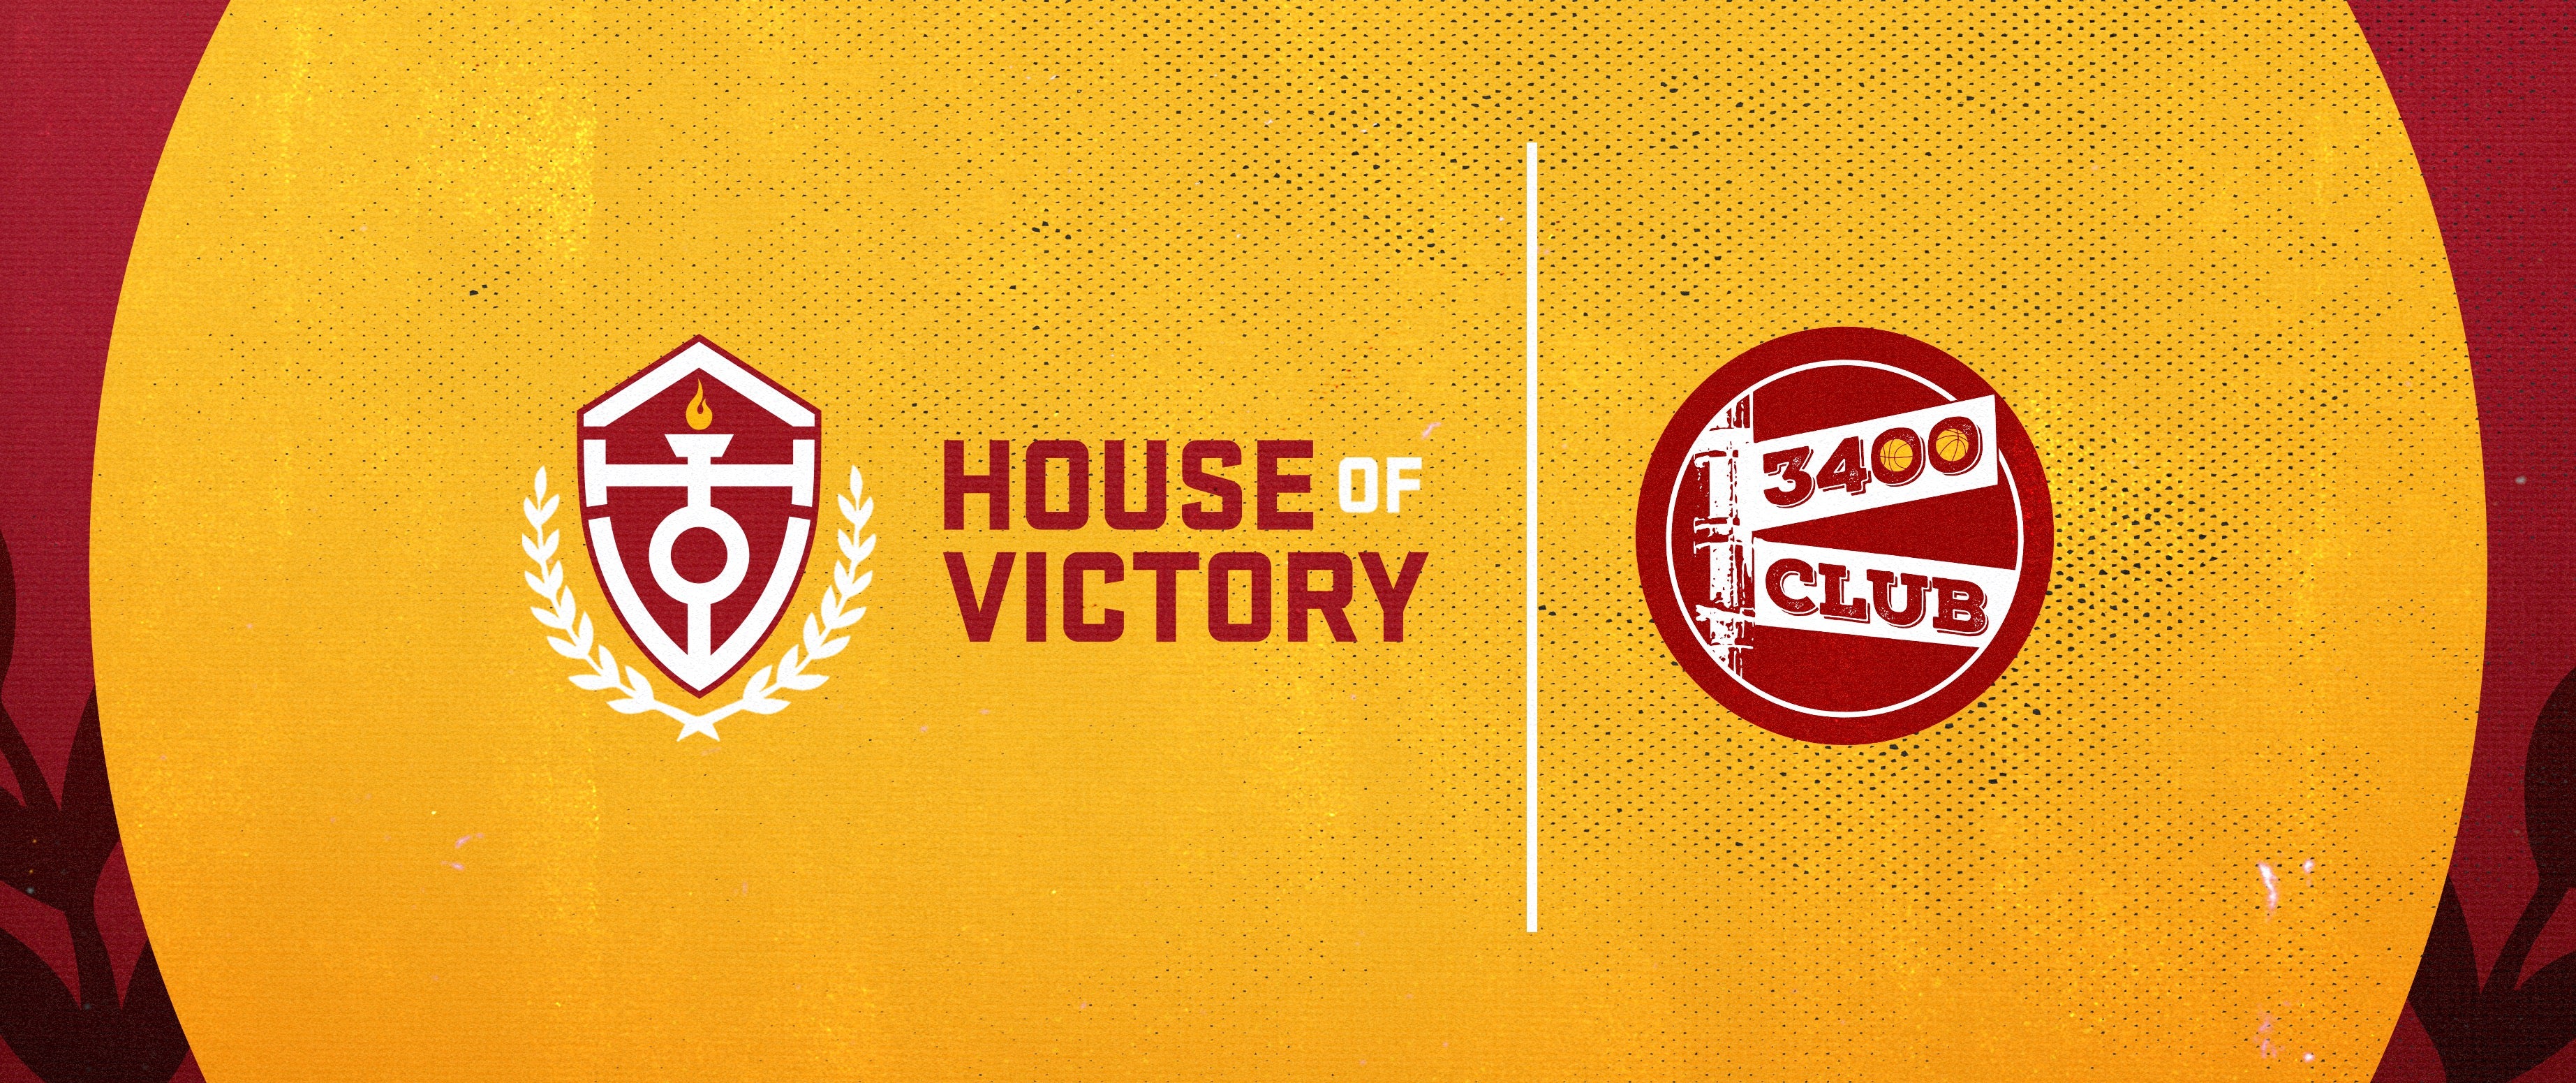 House of Victory Merges with 3400 Club